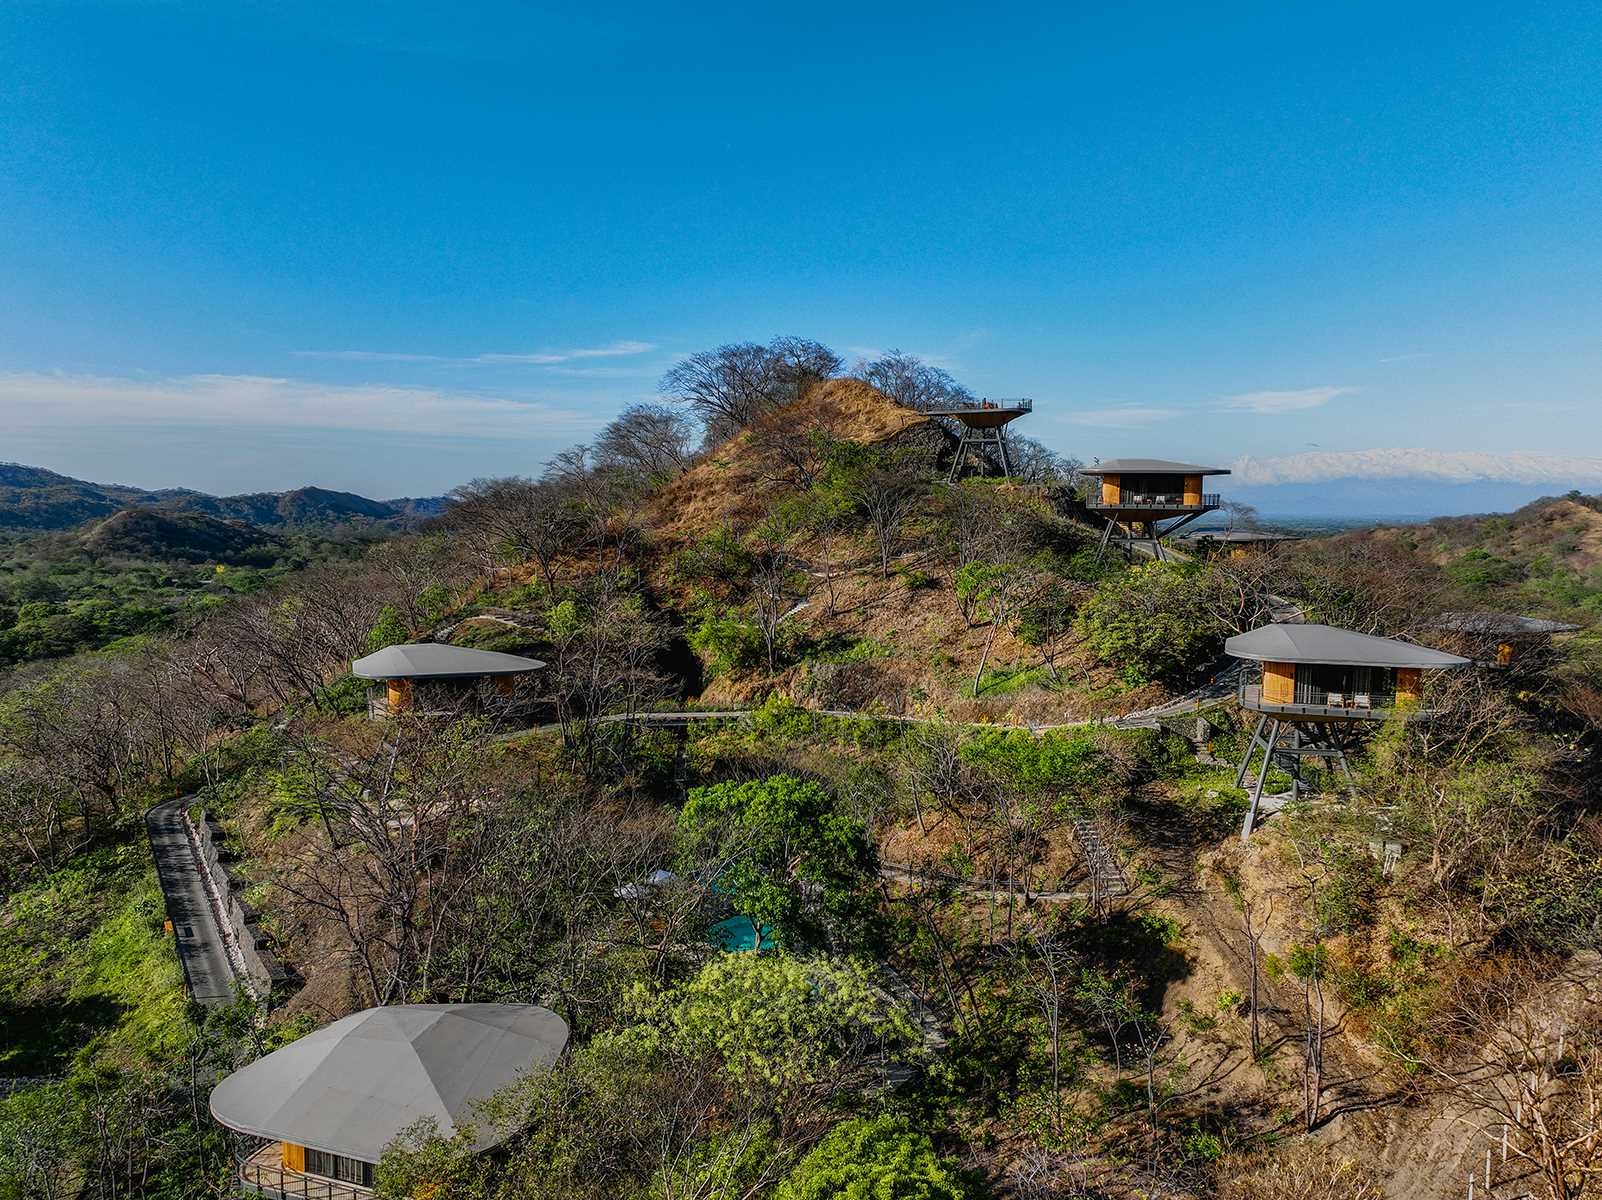 A modern hotel in Costa Rica has a series of elevated cabins inspired by tree houses.